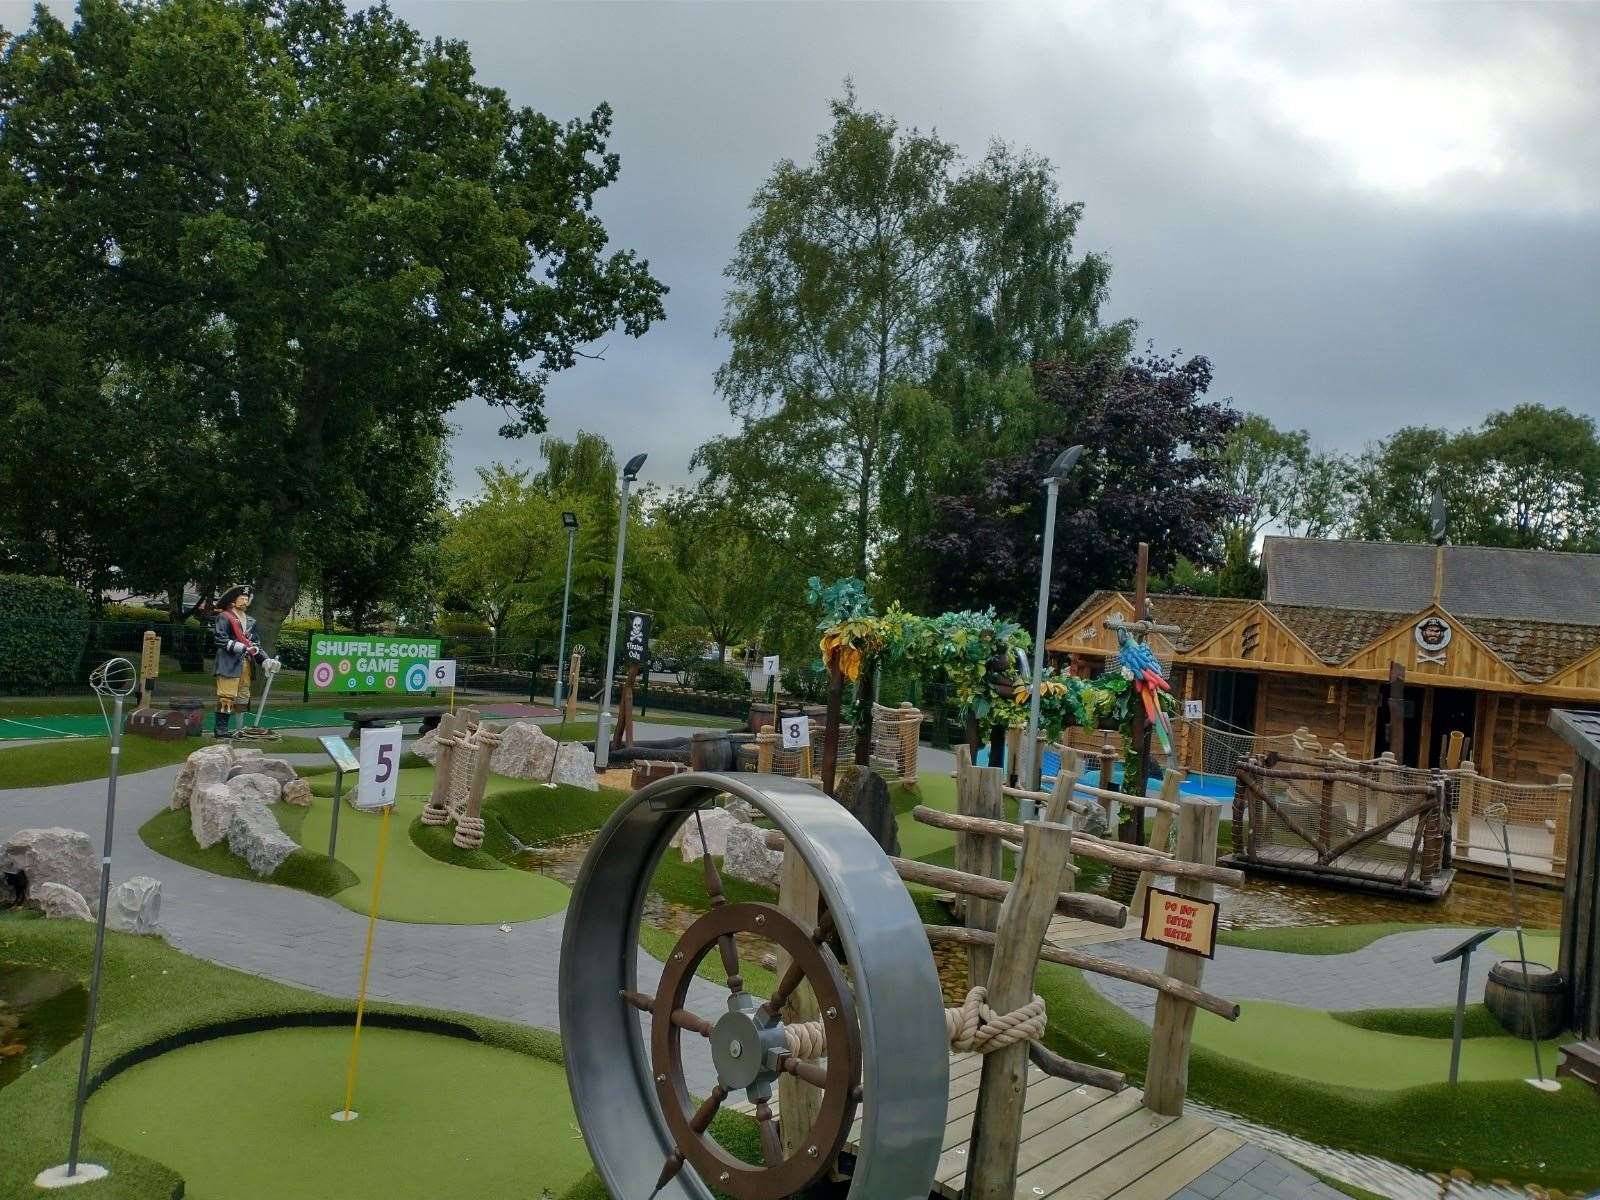 Pirate-themed crazy golf.